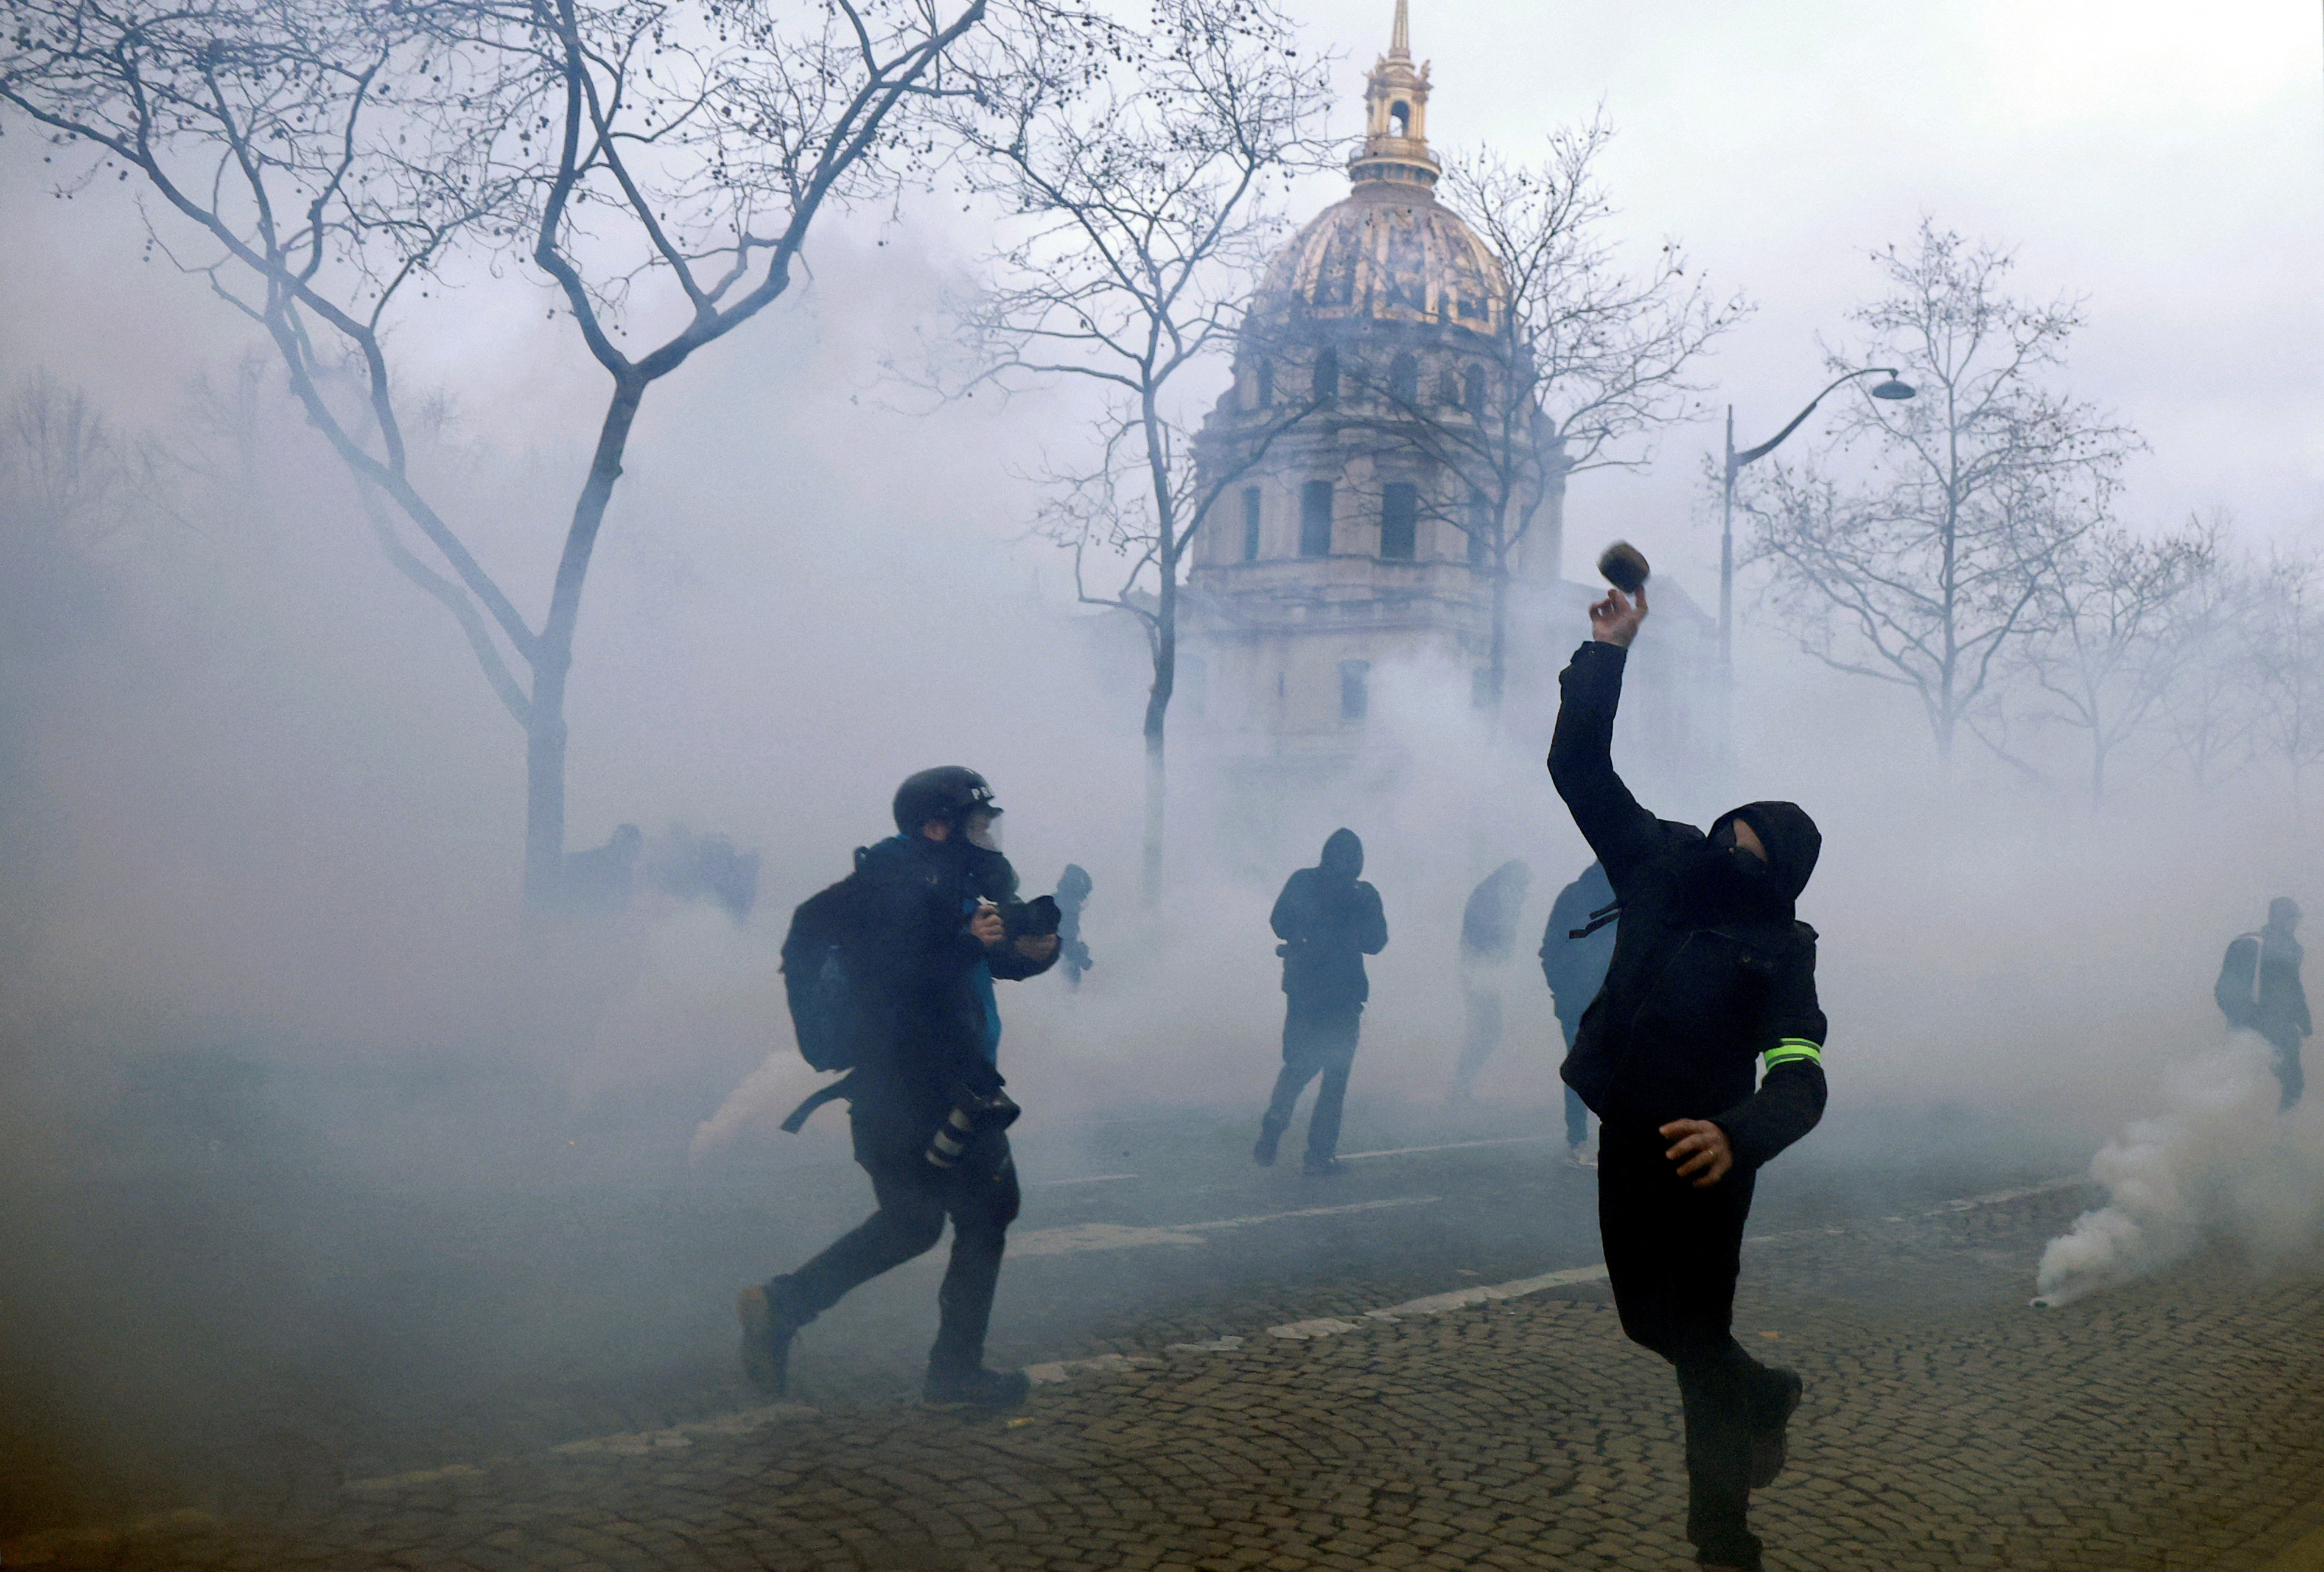 National strike in France to protest pension reform